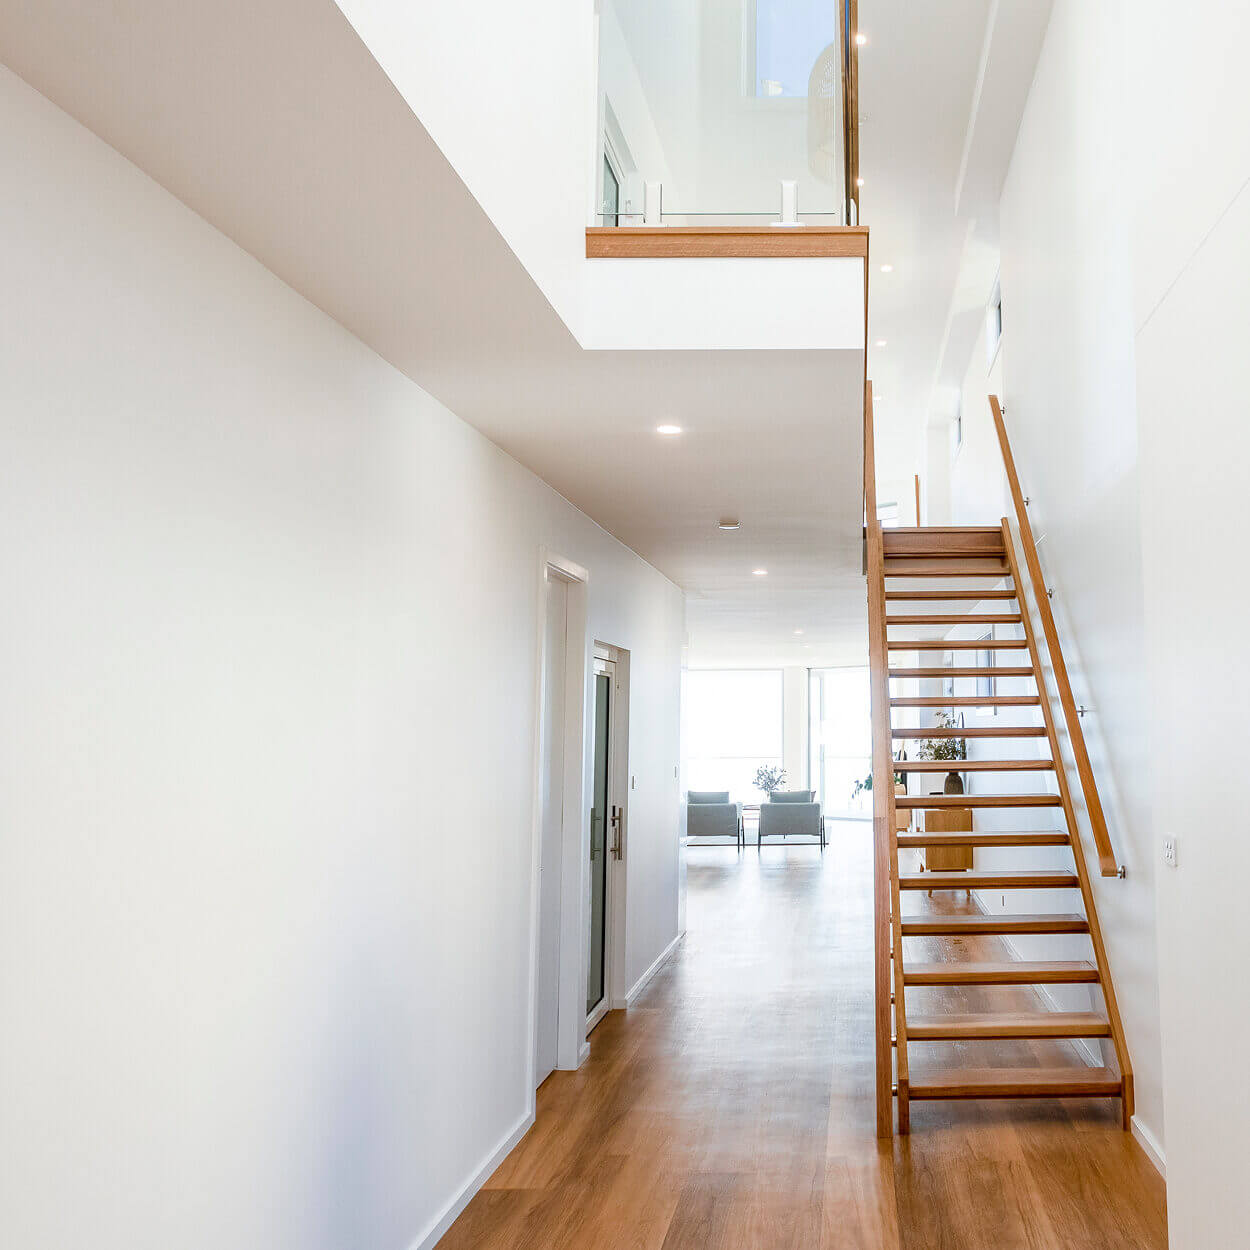 A modern, bright interior of a home featuring a custom-built wooden staircase leading to a mezzanine. The room has white walls, sleek hardwood floors, and is well-lit from large windows visible